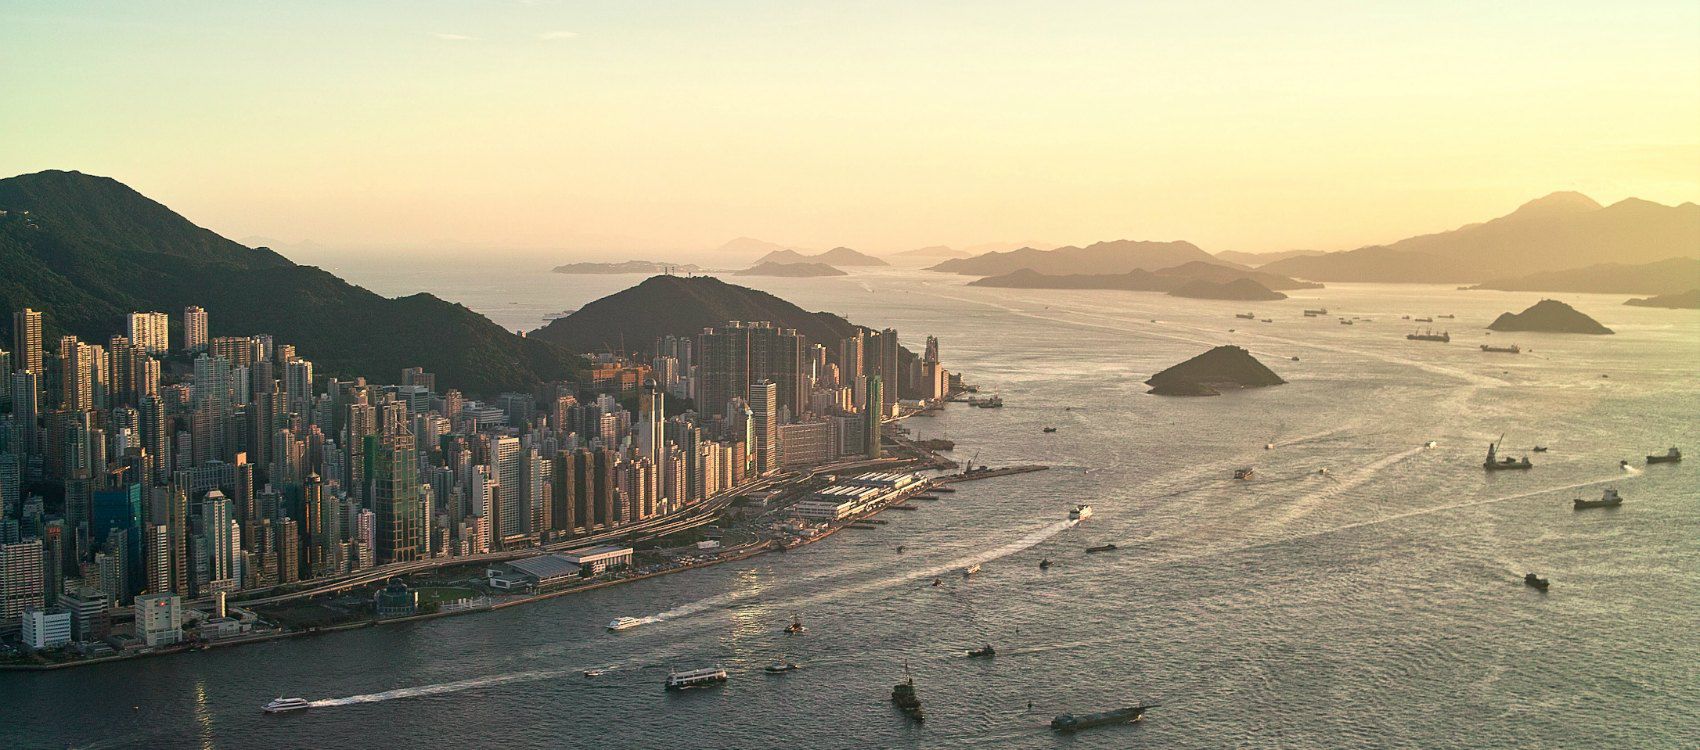 aerial view of hong kong's skyline with boats and islands in background